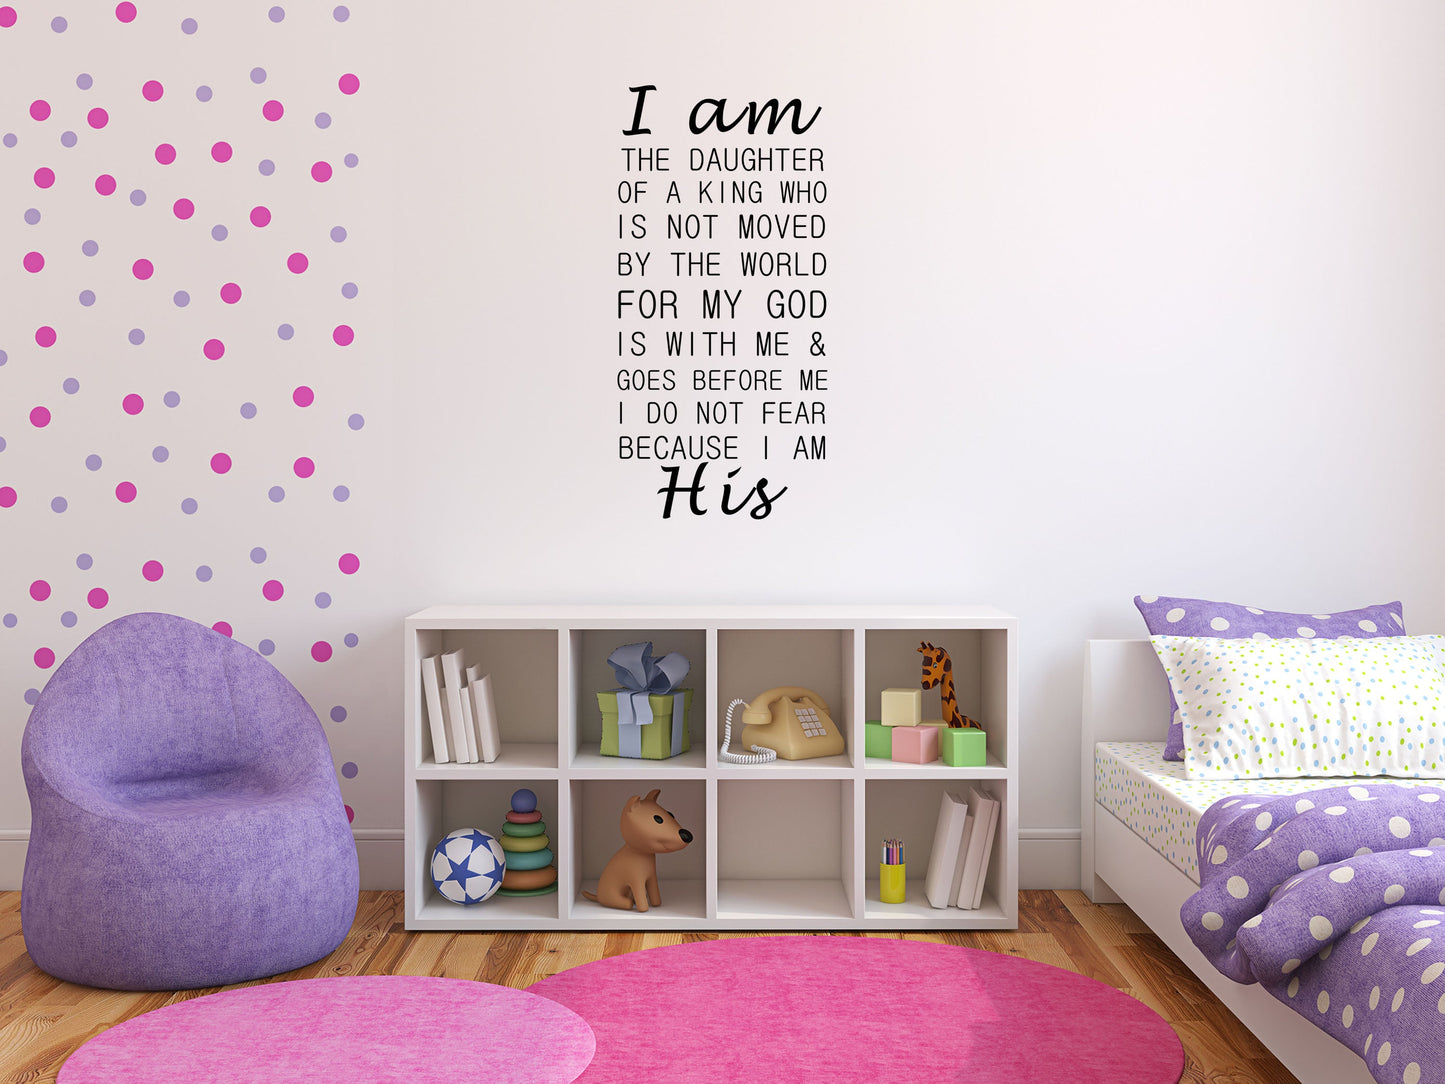 I Am The Daughter Of A King - Inspirational Wall Decals Vinyl Wall Decal Inspirational Wall Signs 